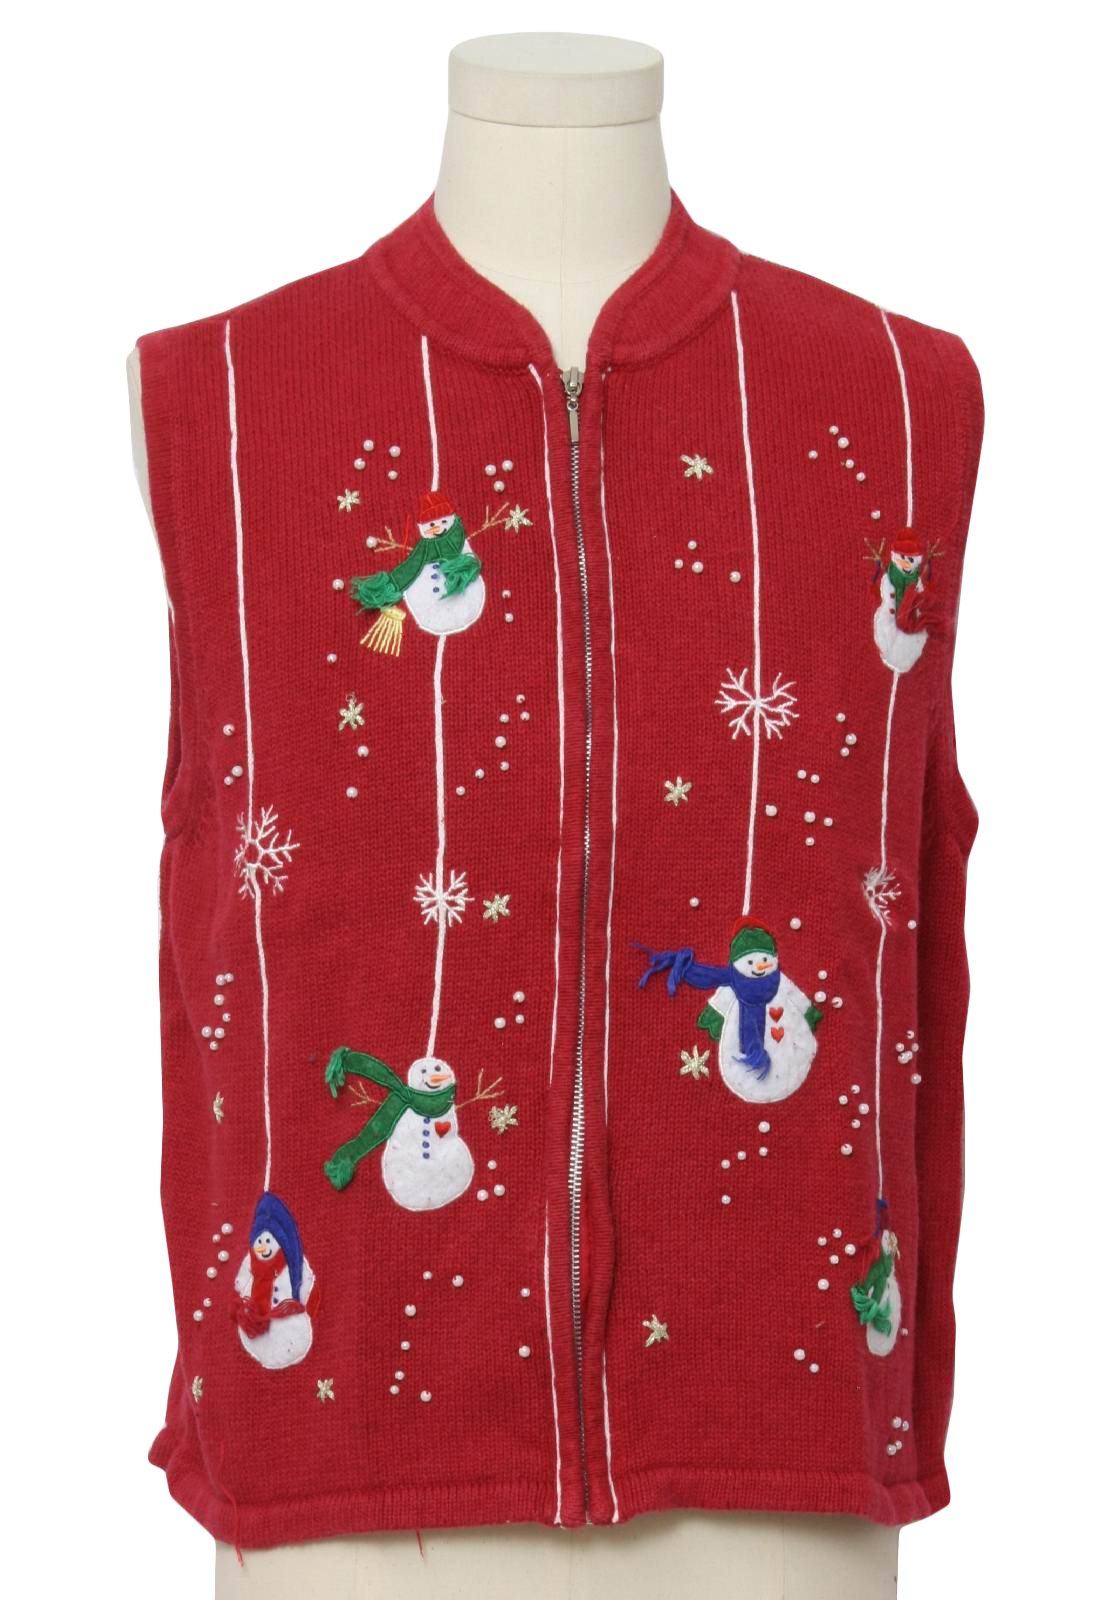 Womens Ugly Christmas Sweater Vest: -Cappagallo- Womens Red background ...